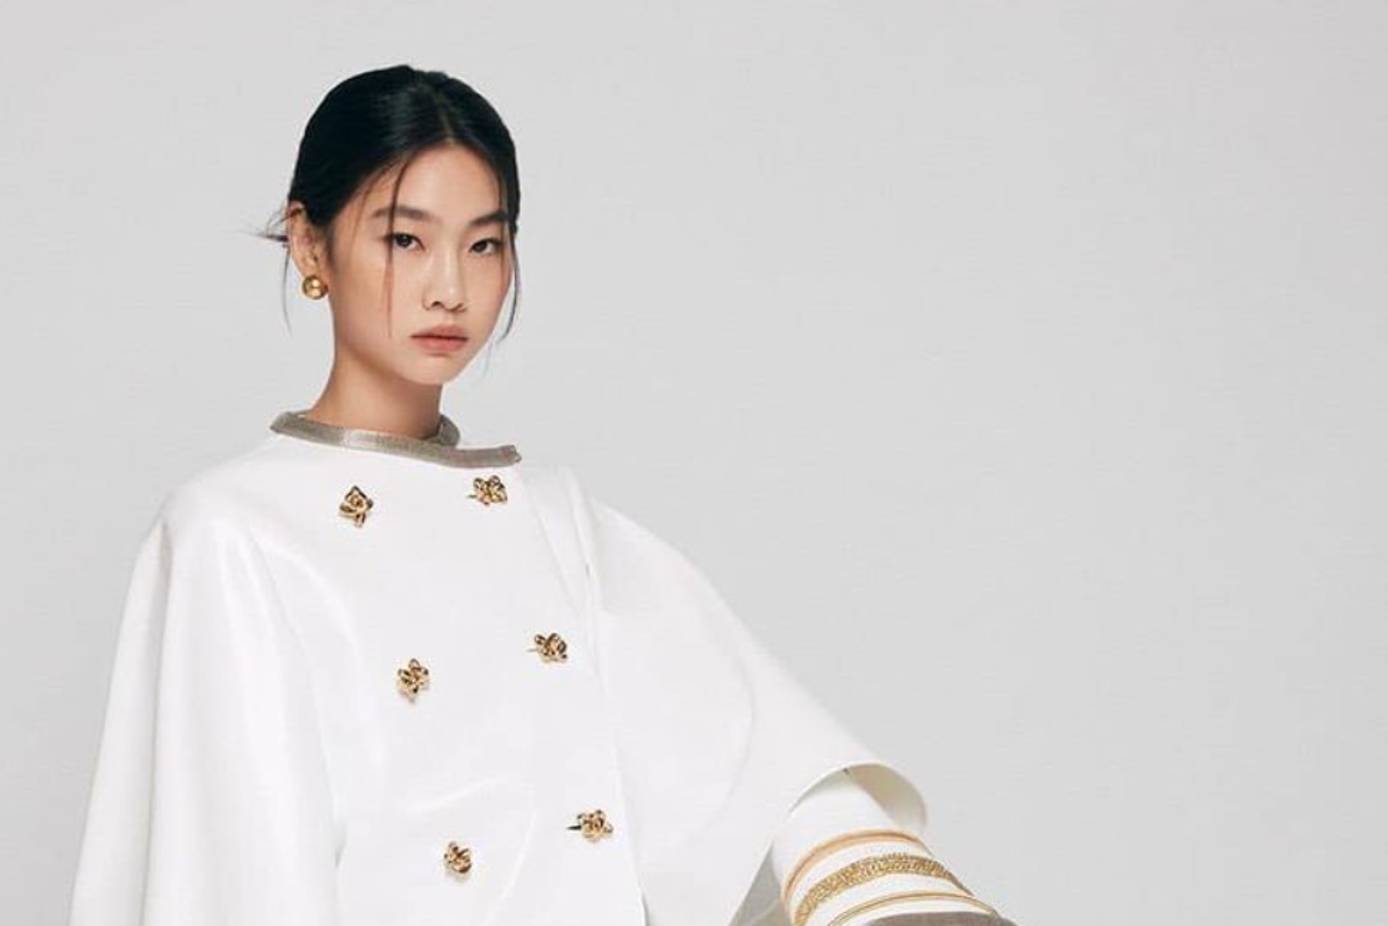 Squid Game's HoYeon Jung becomes global ambassador at Louis Vuitton